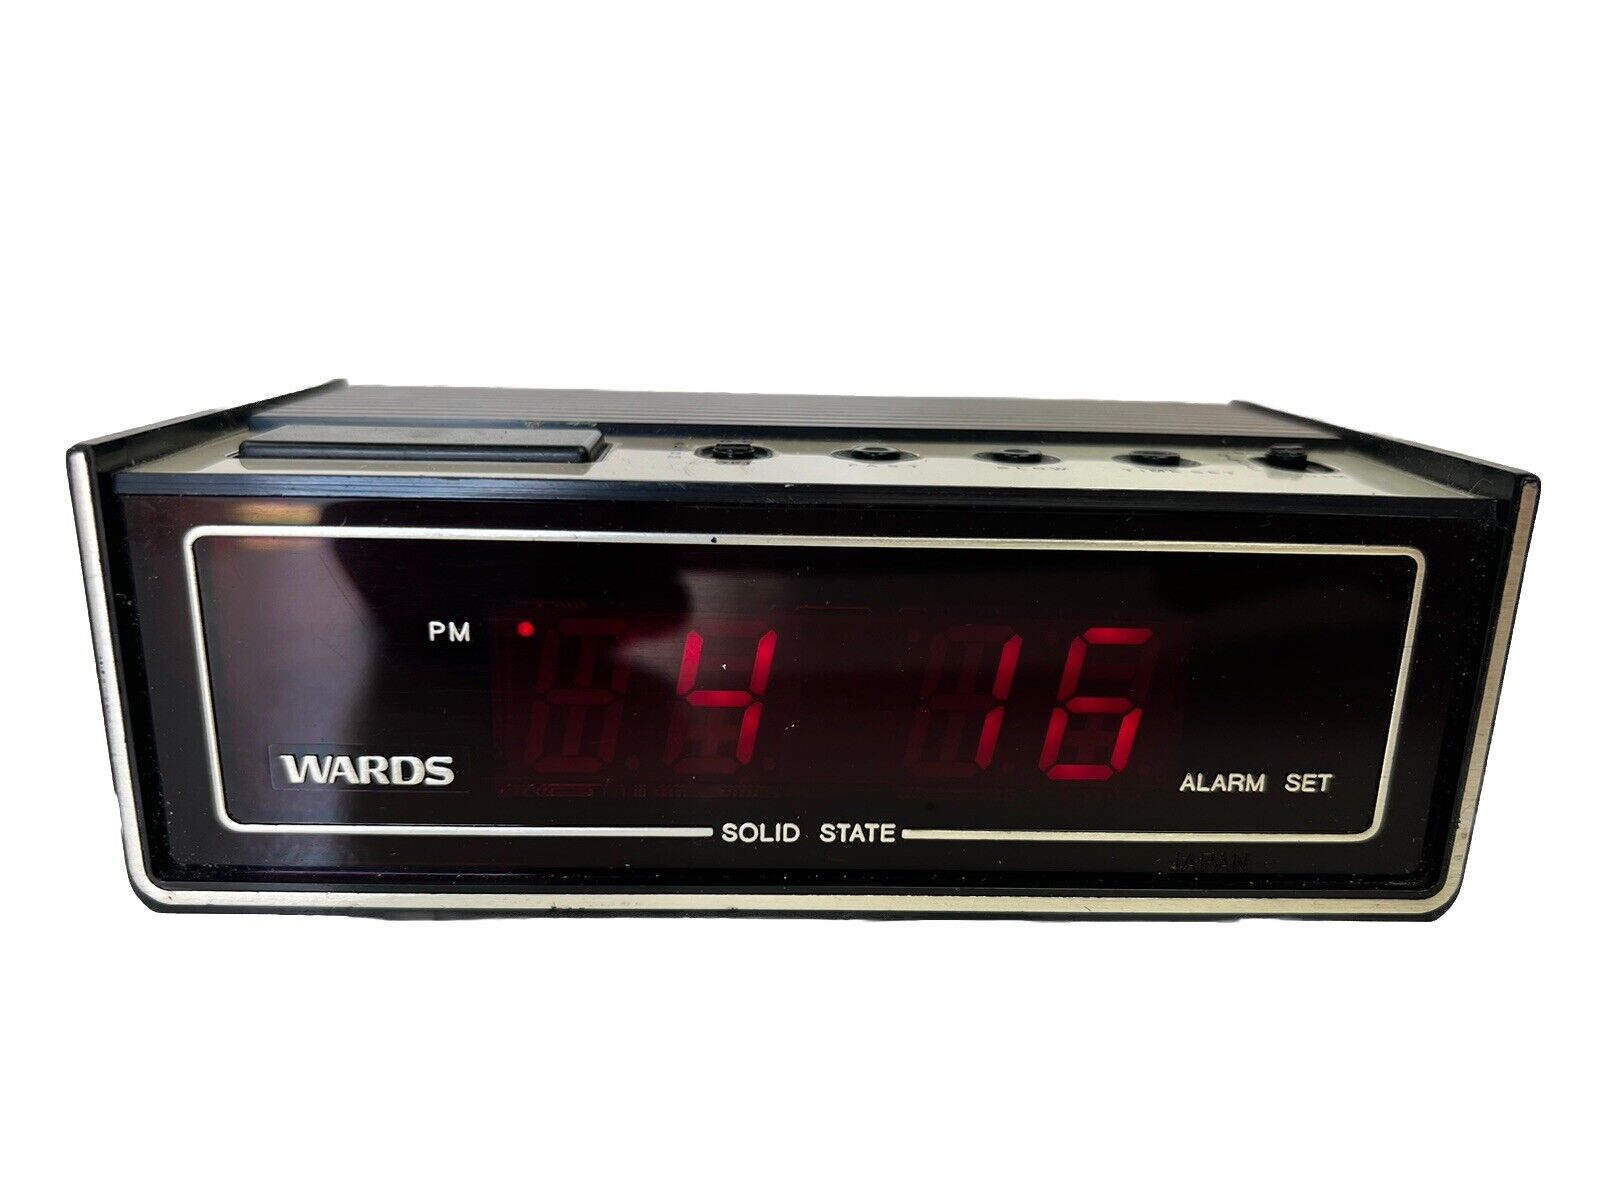 WARDS SOLID STATE ALARM CLOCK MODEL 45-9778 MADE IN JAPAN SIMULATED WOOD GRAIN